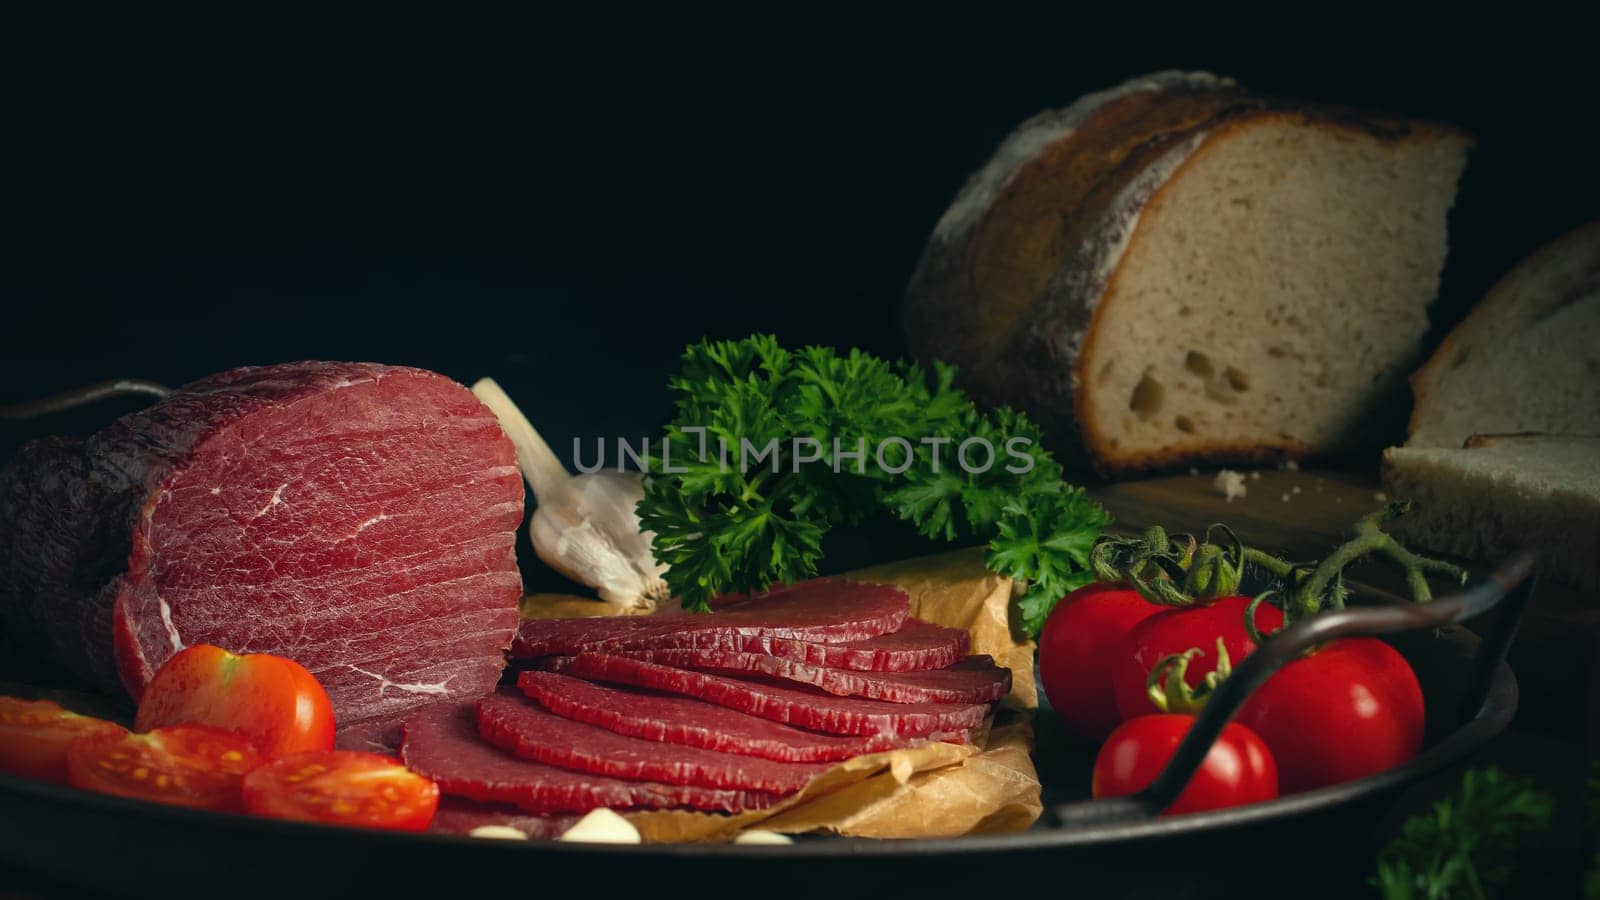 Whole and sliced bresaola on a metal round tray with tomatoes, garlic and bread.